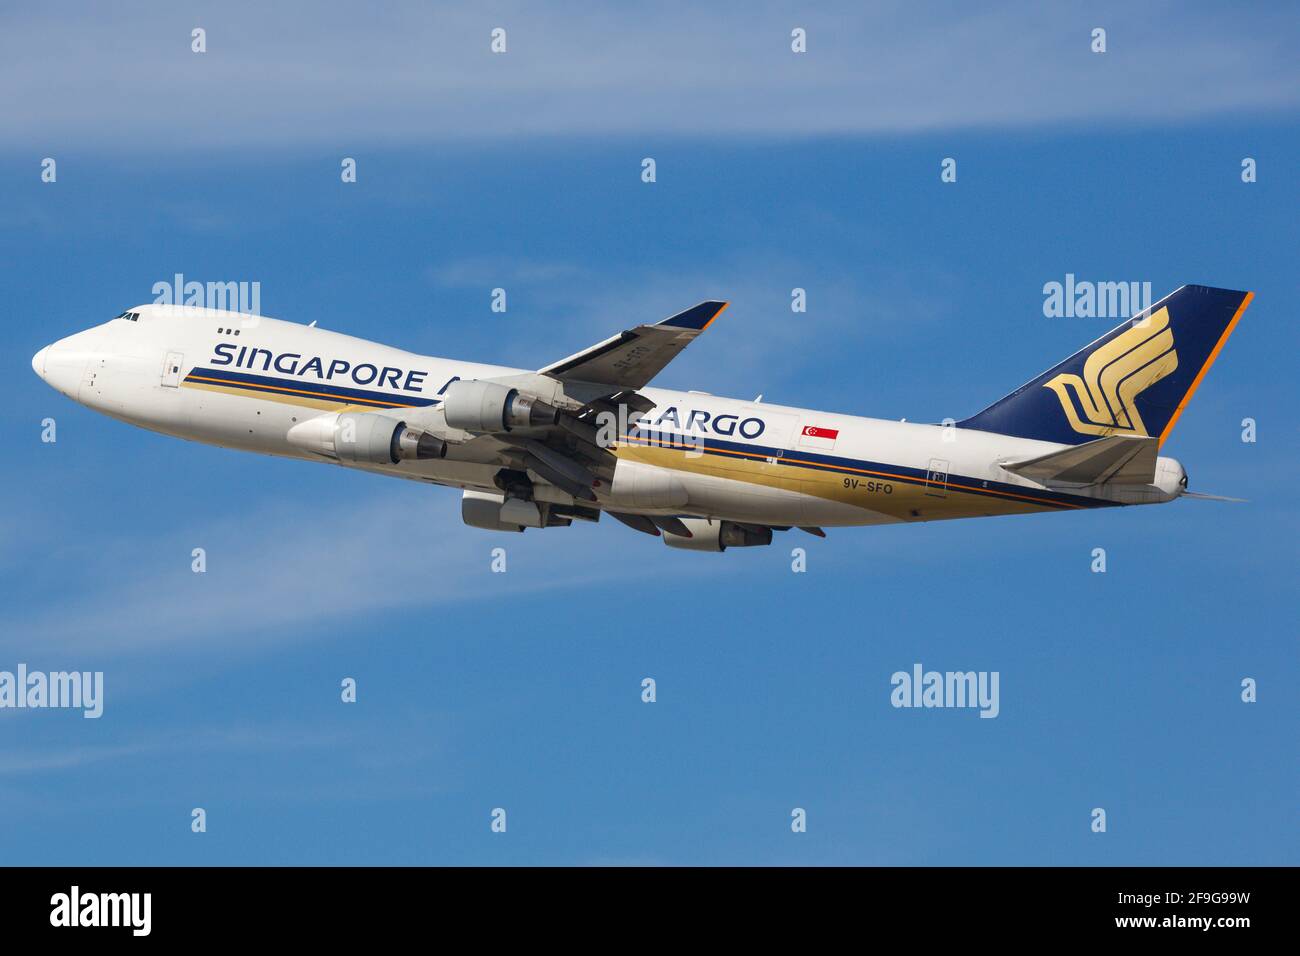 Los Angeles, USA - 22. February 2016: Singapore Airlines Cargo Boeing 747-400 at Los Angeles airport (LAX) in the USA. Boeing is an aircraft manufactu Stock Photo